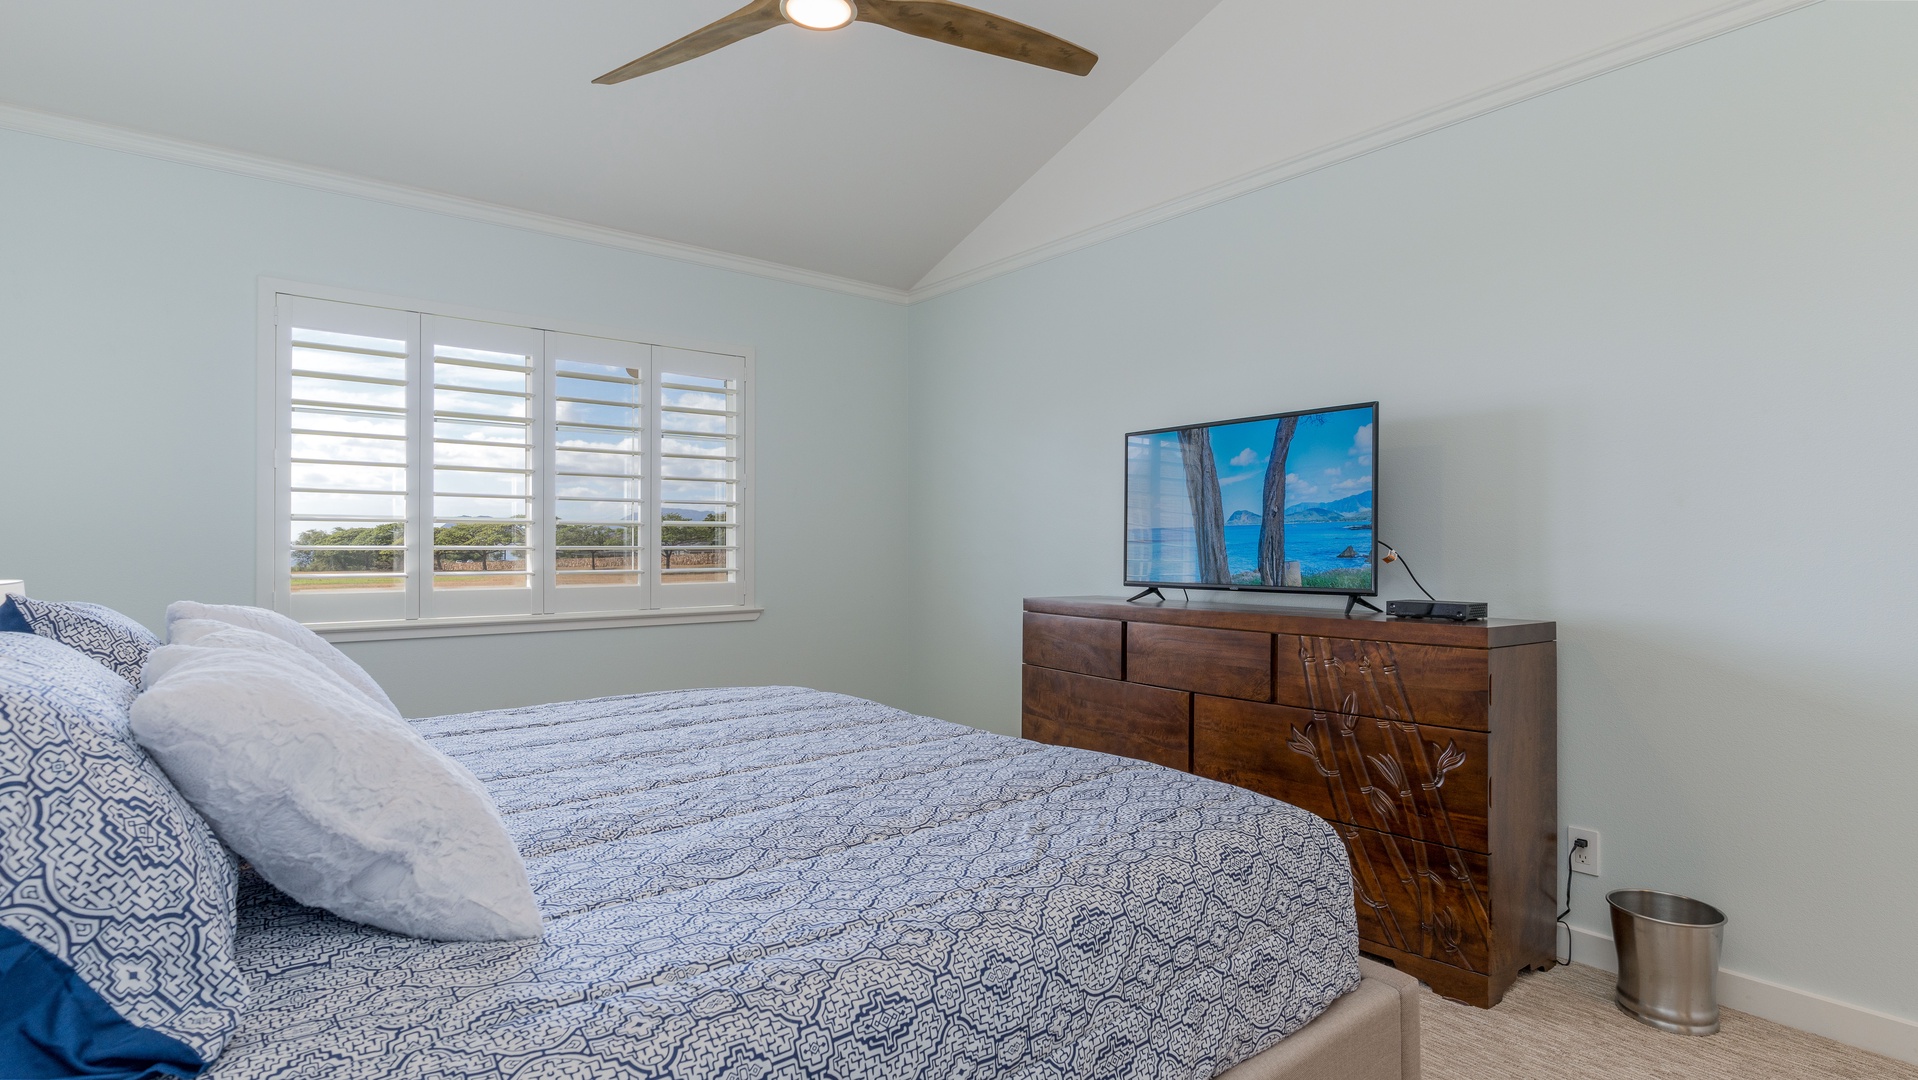 Kapolei Vacation Rentals, Kai Lani 21C - The primary guest bedroom includes a dresser and television.